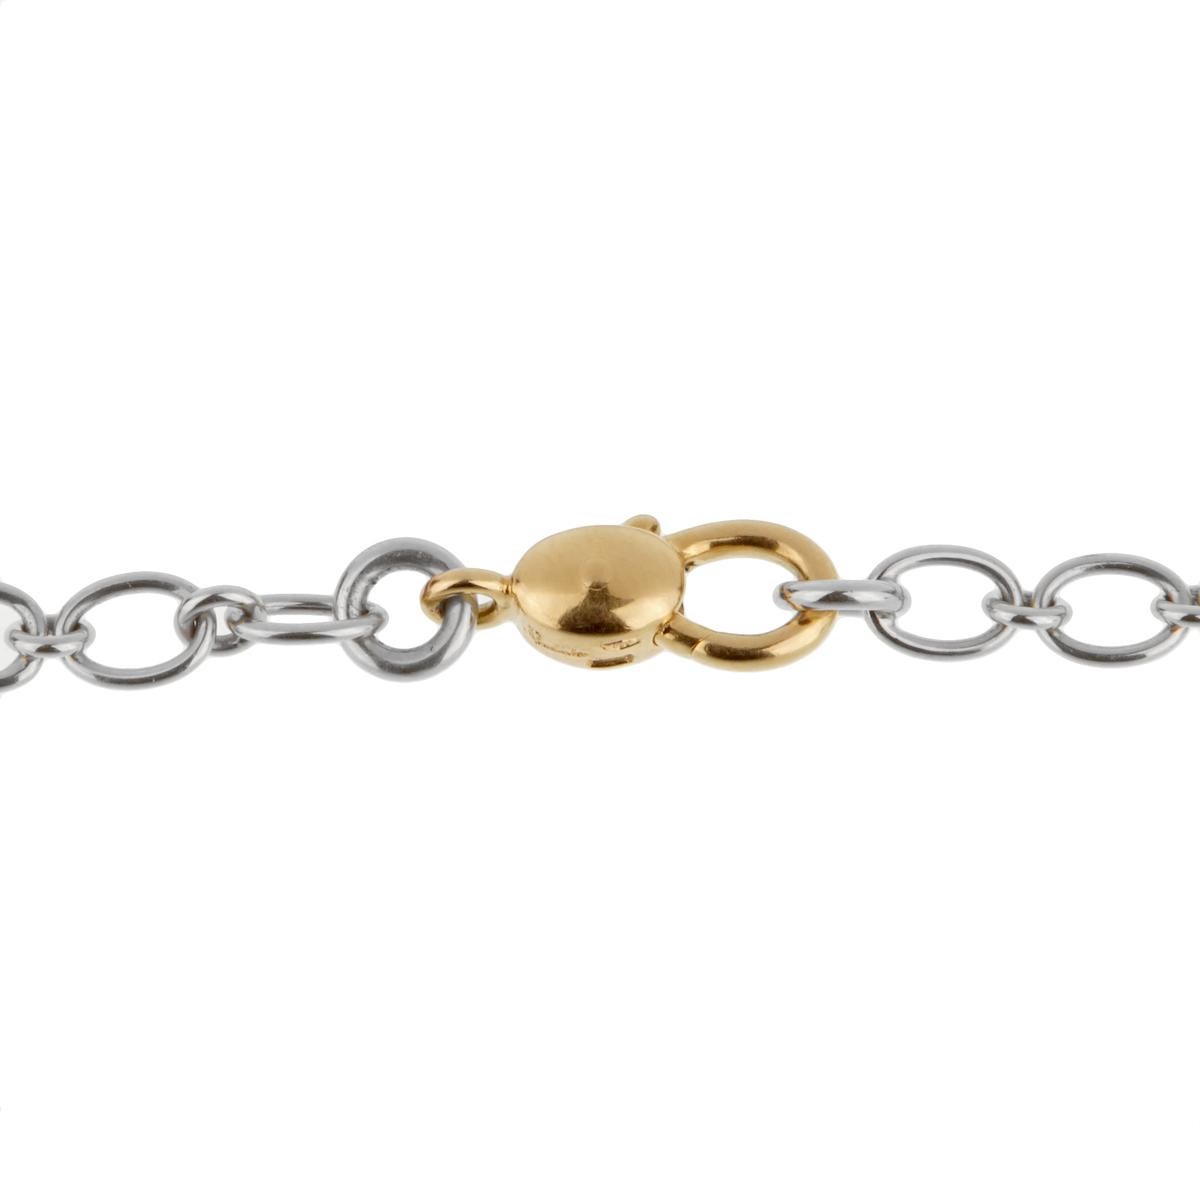 A fabulous chain link necklace by Pomellato showcasing intertwined 18k white gold links followed by the iconic 18k yellow gold clasp. The necklace measures 17